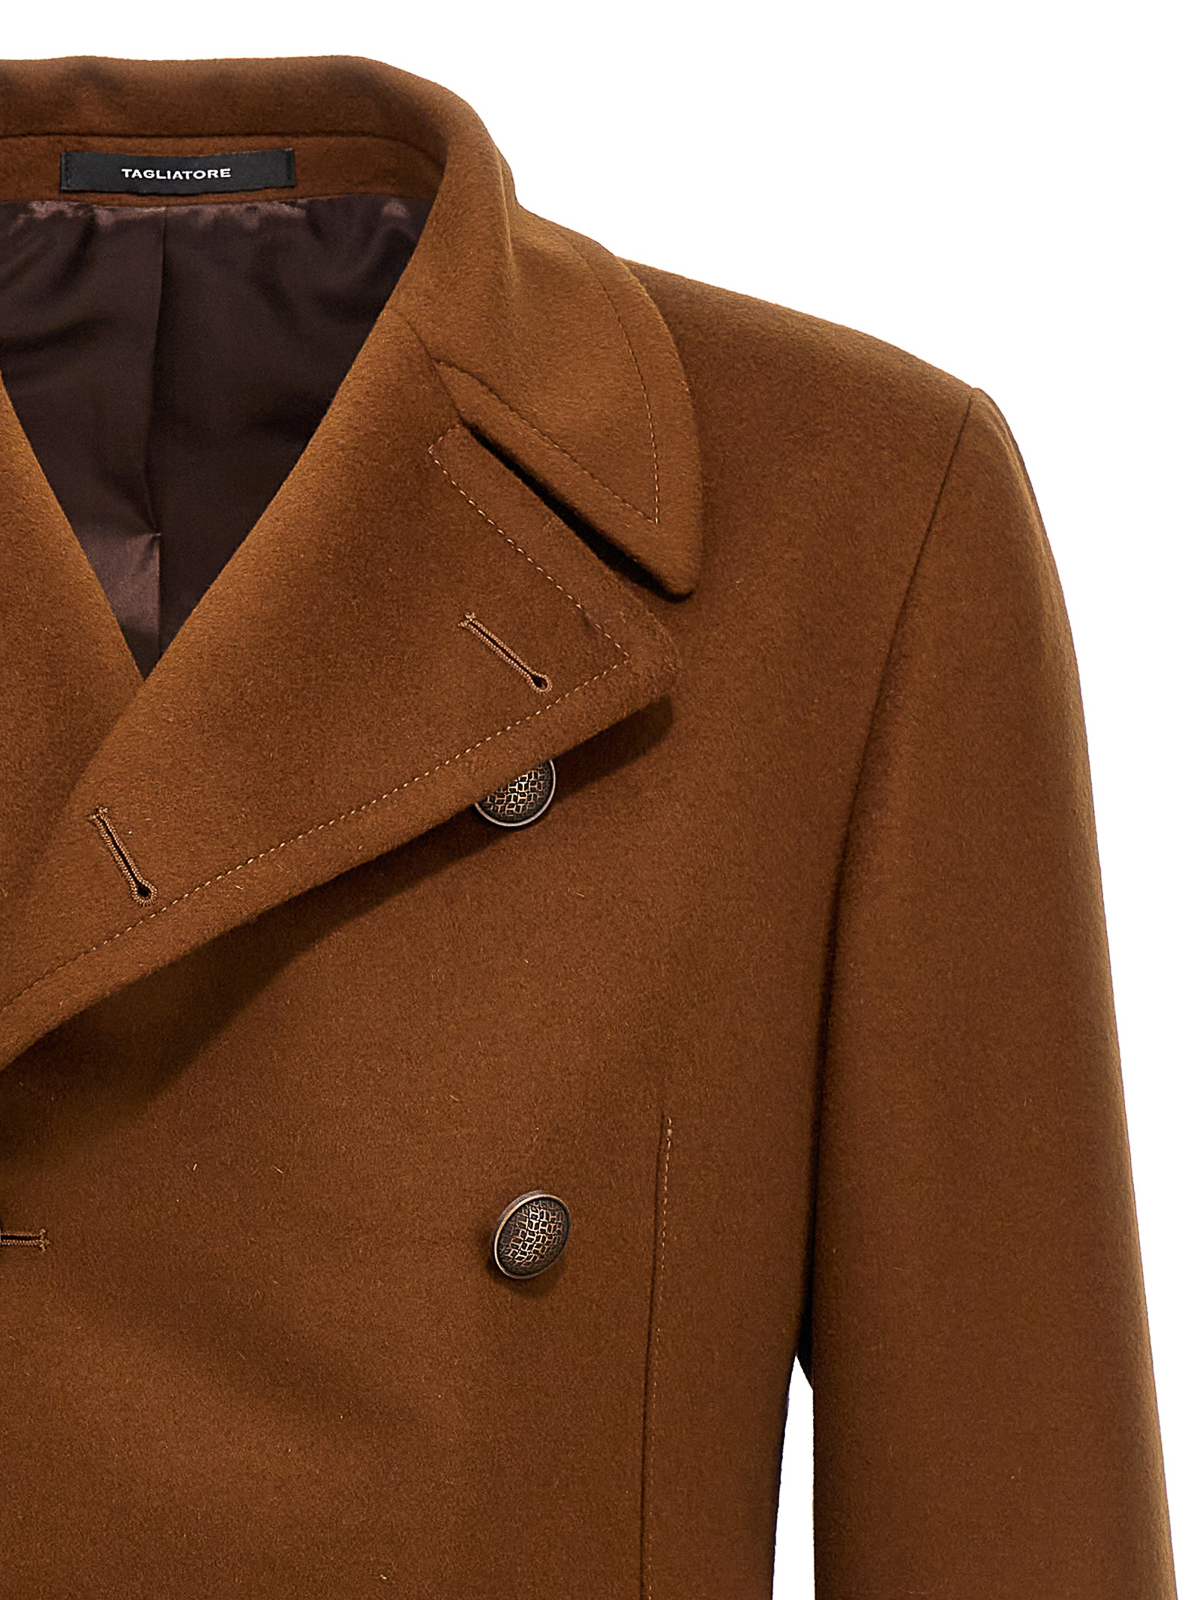 Tagliatore Double Breasted Coat in Brown for Men